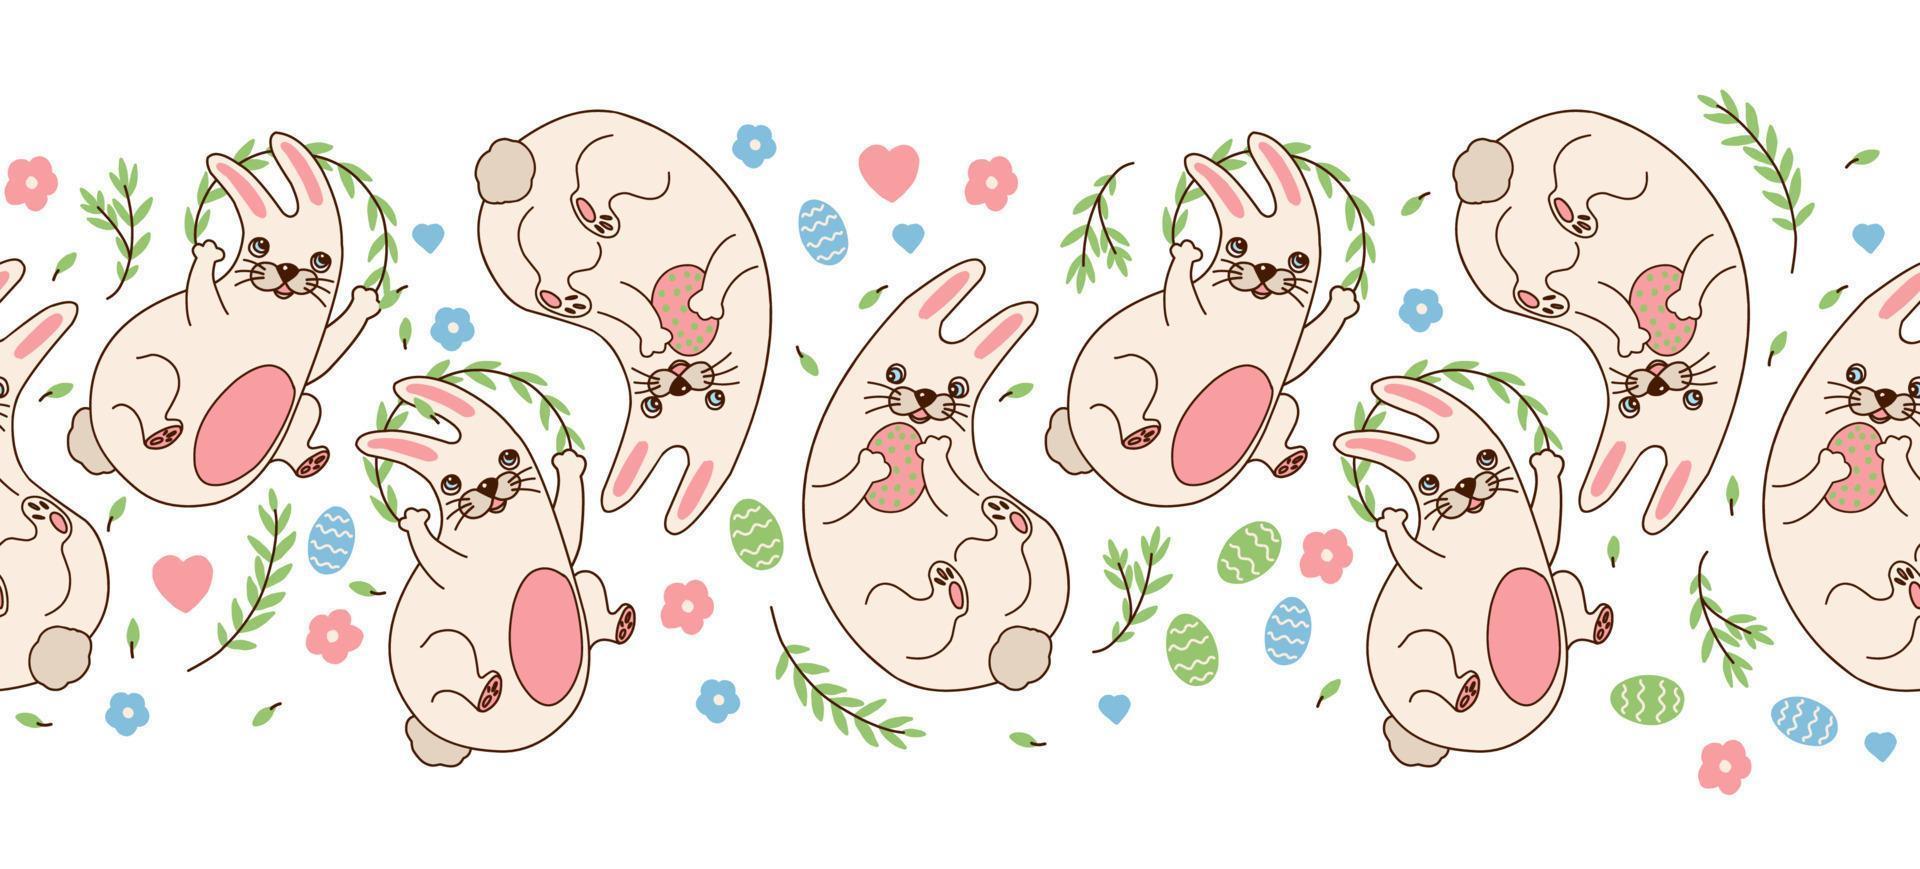 Seamless bunny border. Rabbits with Easter eggs, twigs and flowers. Funny rabbit seamless ornament. Easter decor vector